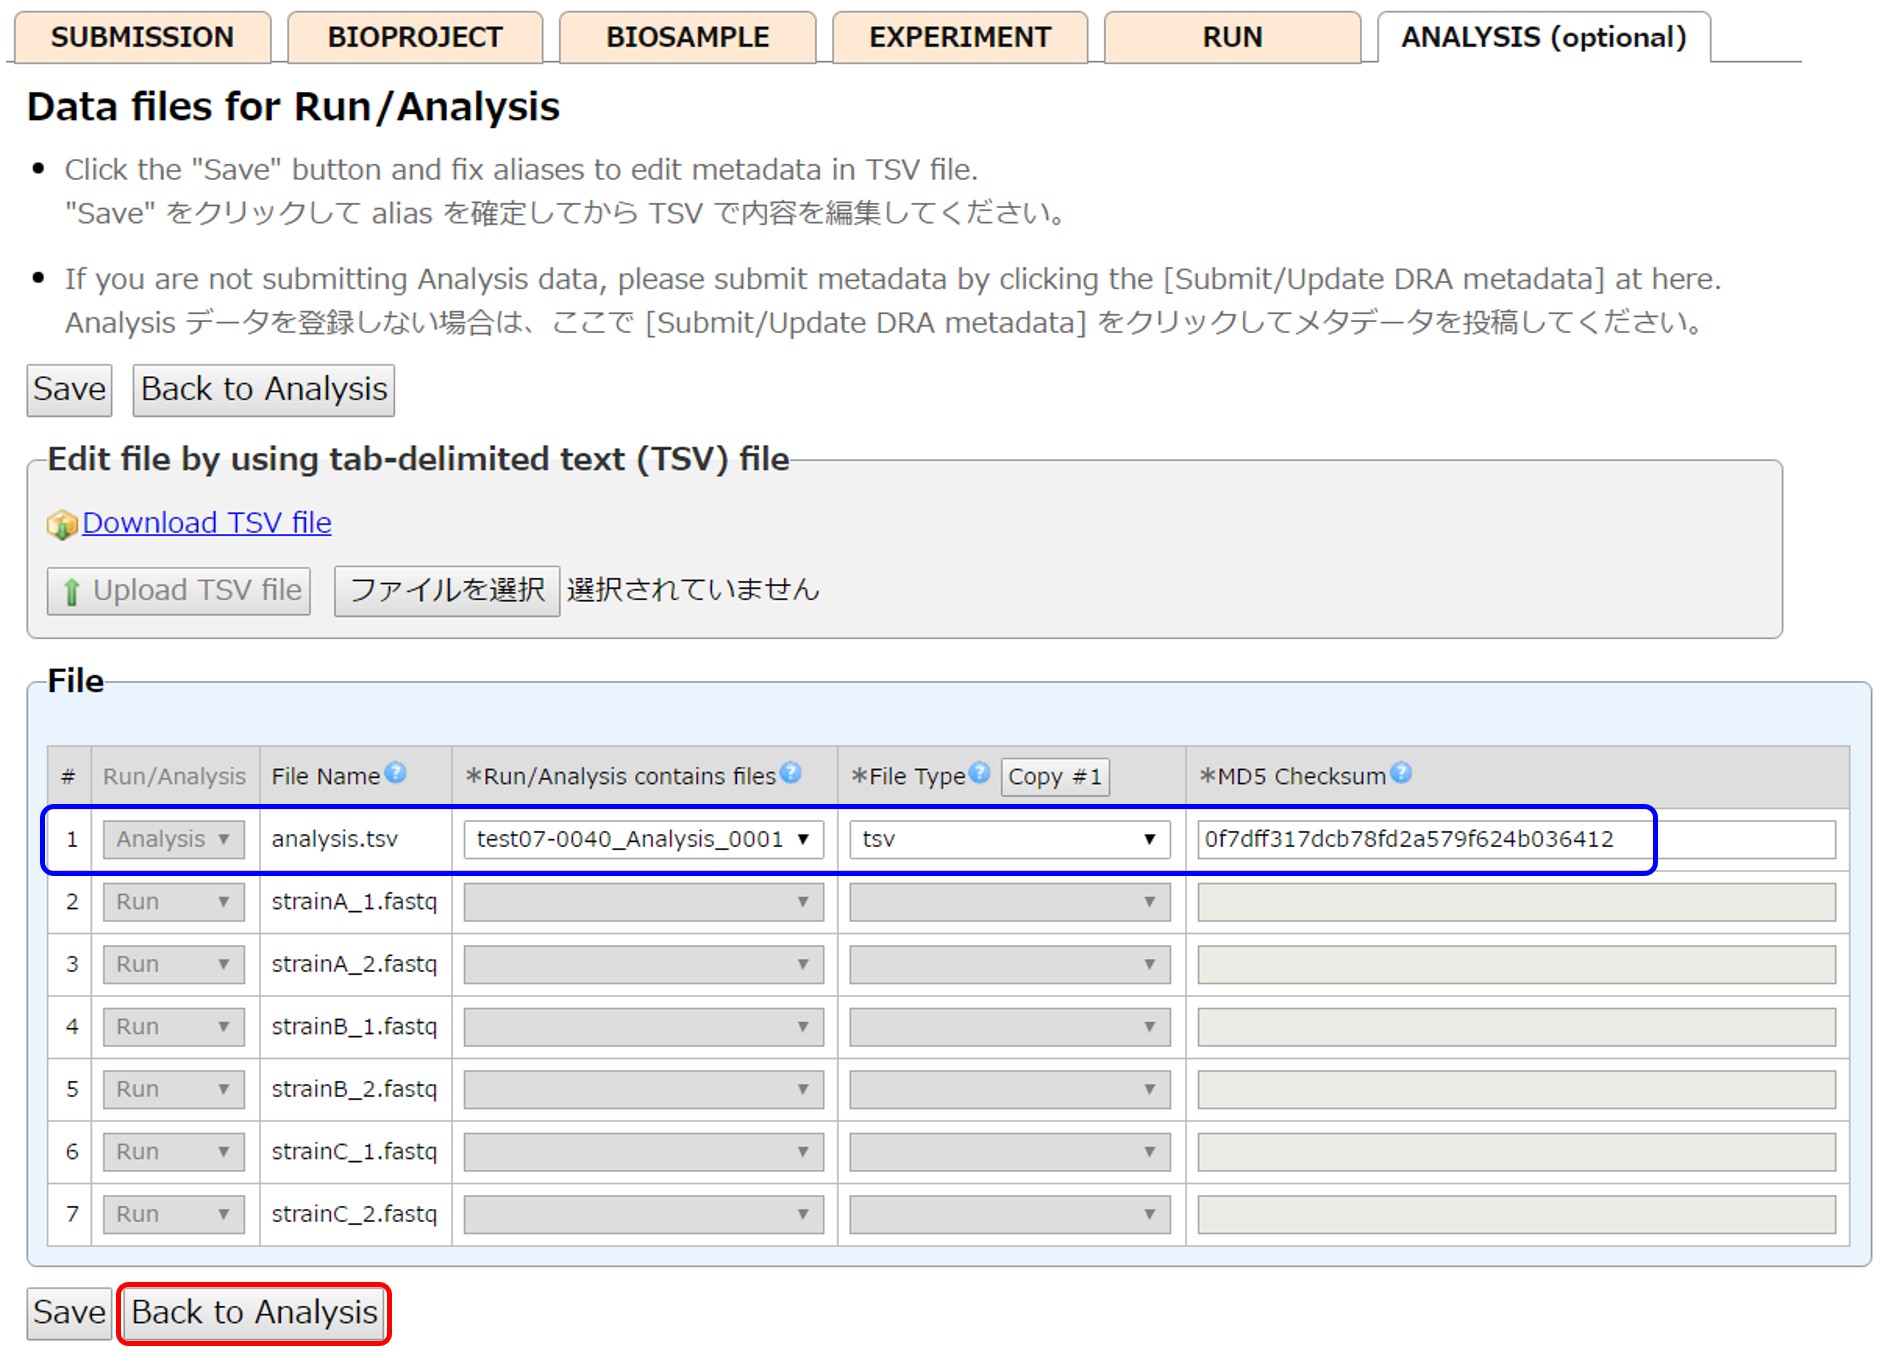 Enter file attributes and link files to Analysis